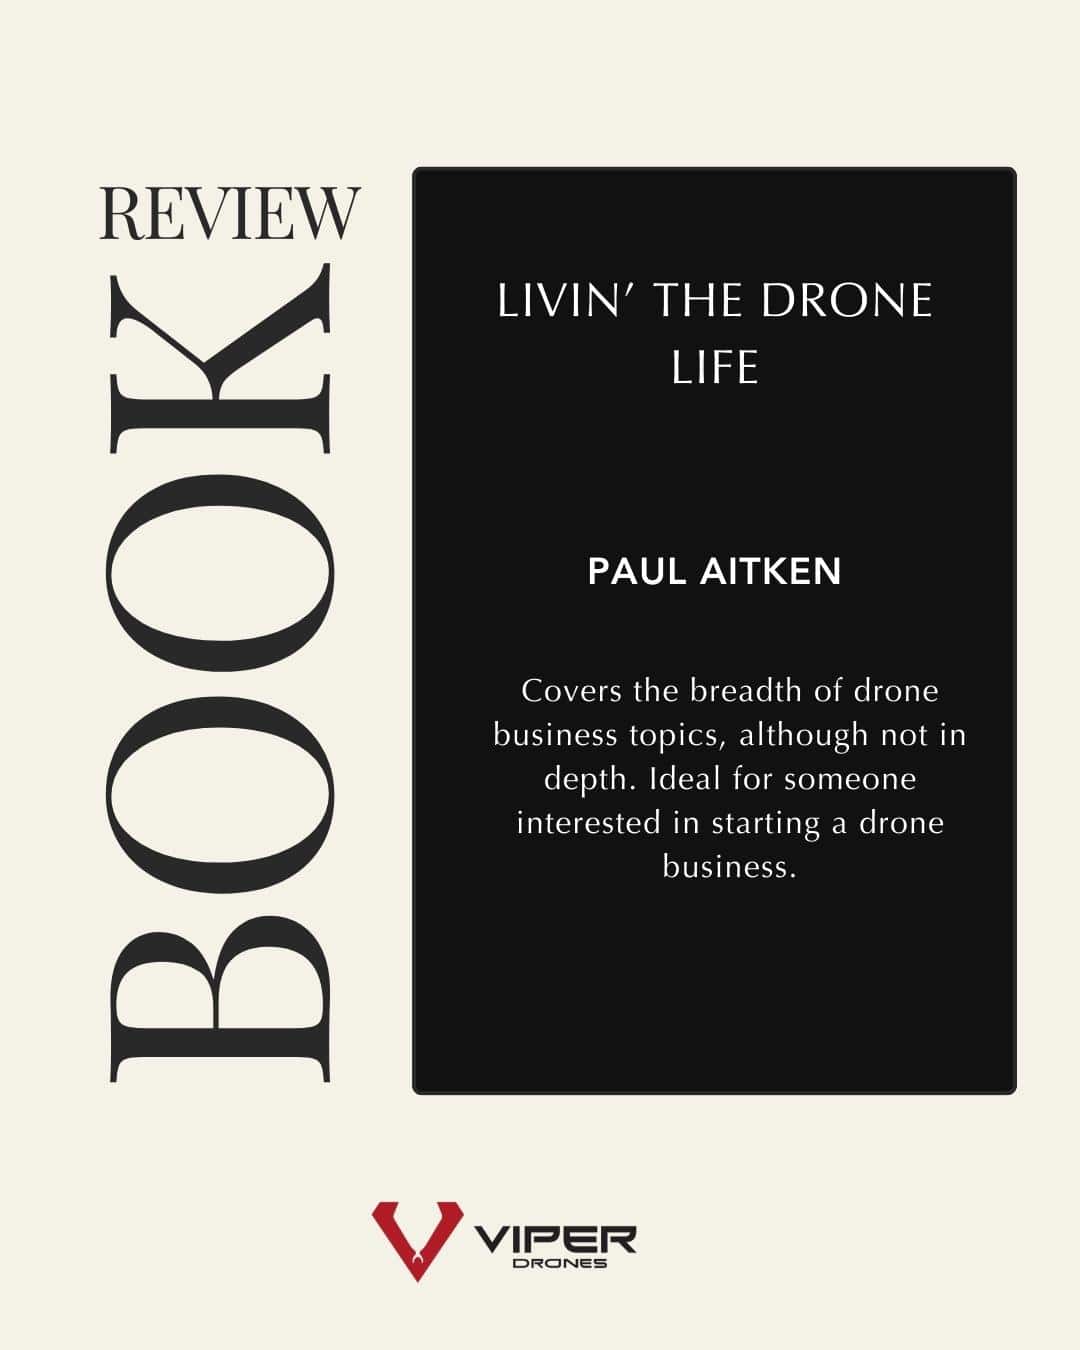 living the drone life book review text